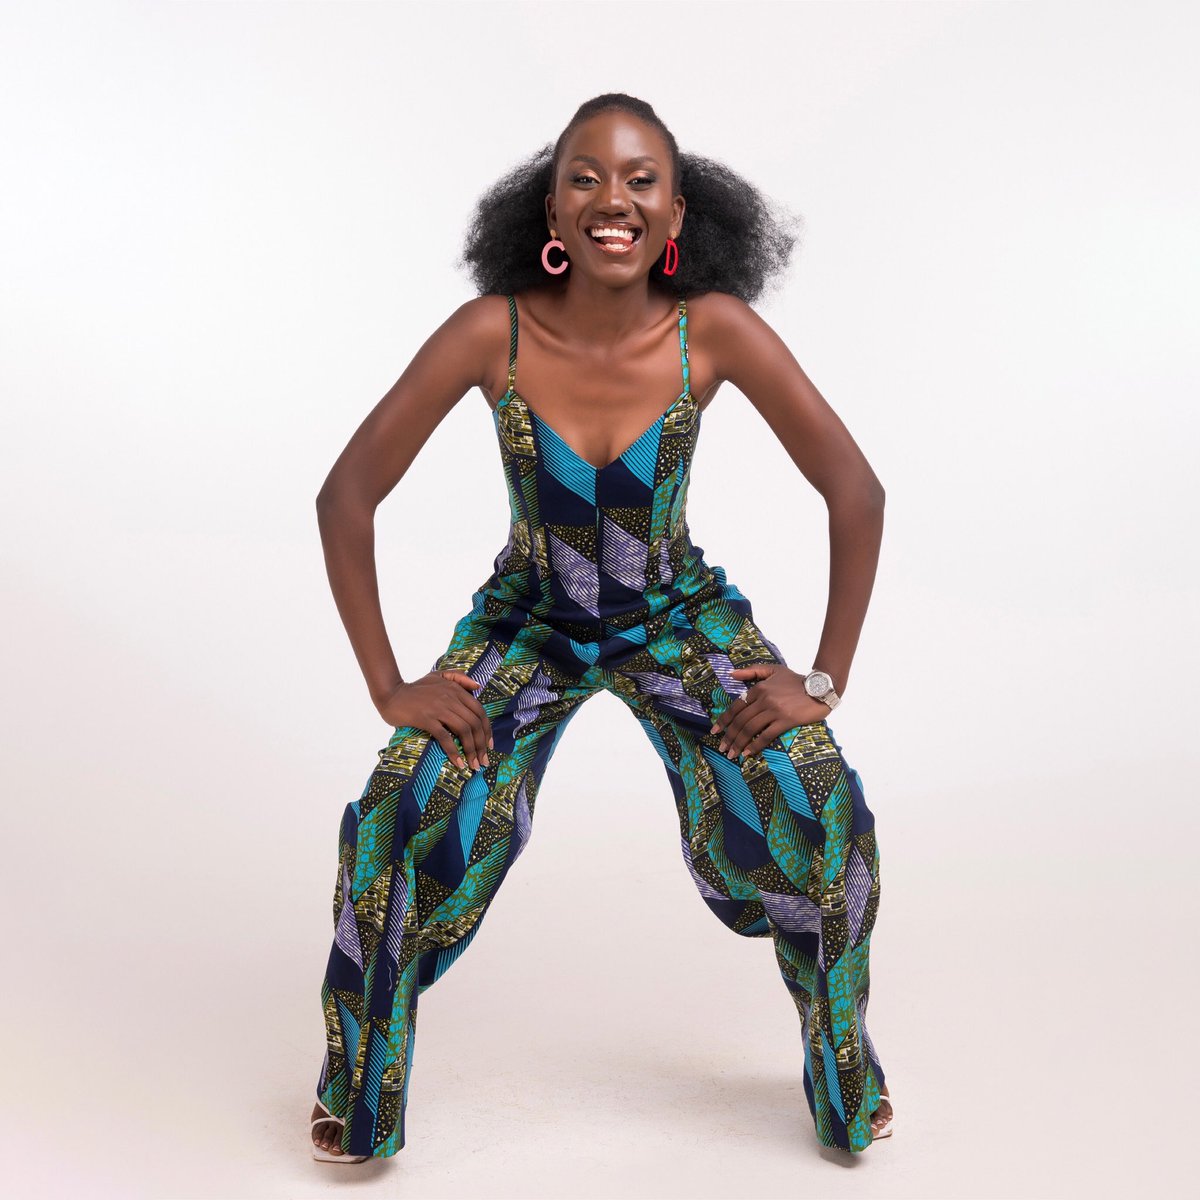 Let everyday have a signature outfit💫

Get yourself marish kitengi jumpsuits available in different prints and sizes 

Size : small, XXL

#jumpsuits #africanprint #fashion #style #unique #marishfahion #africanstyle #jumpsuits #style